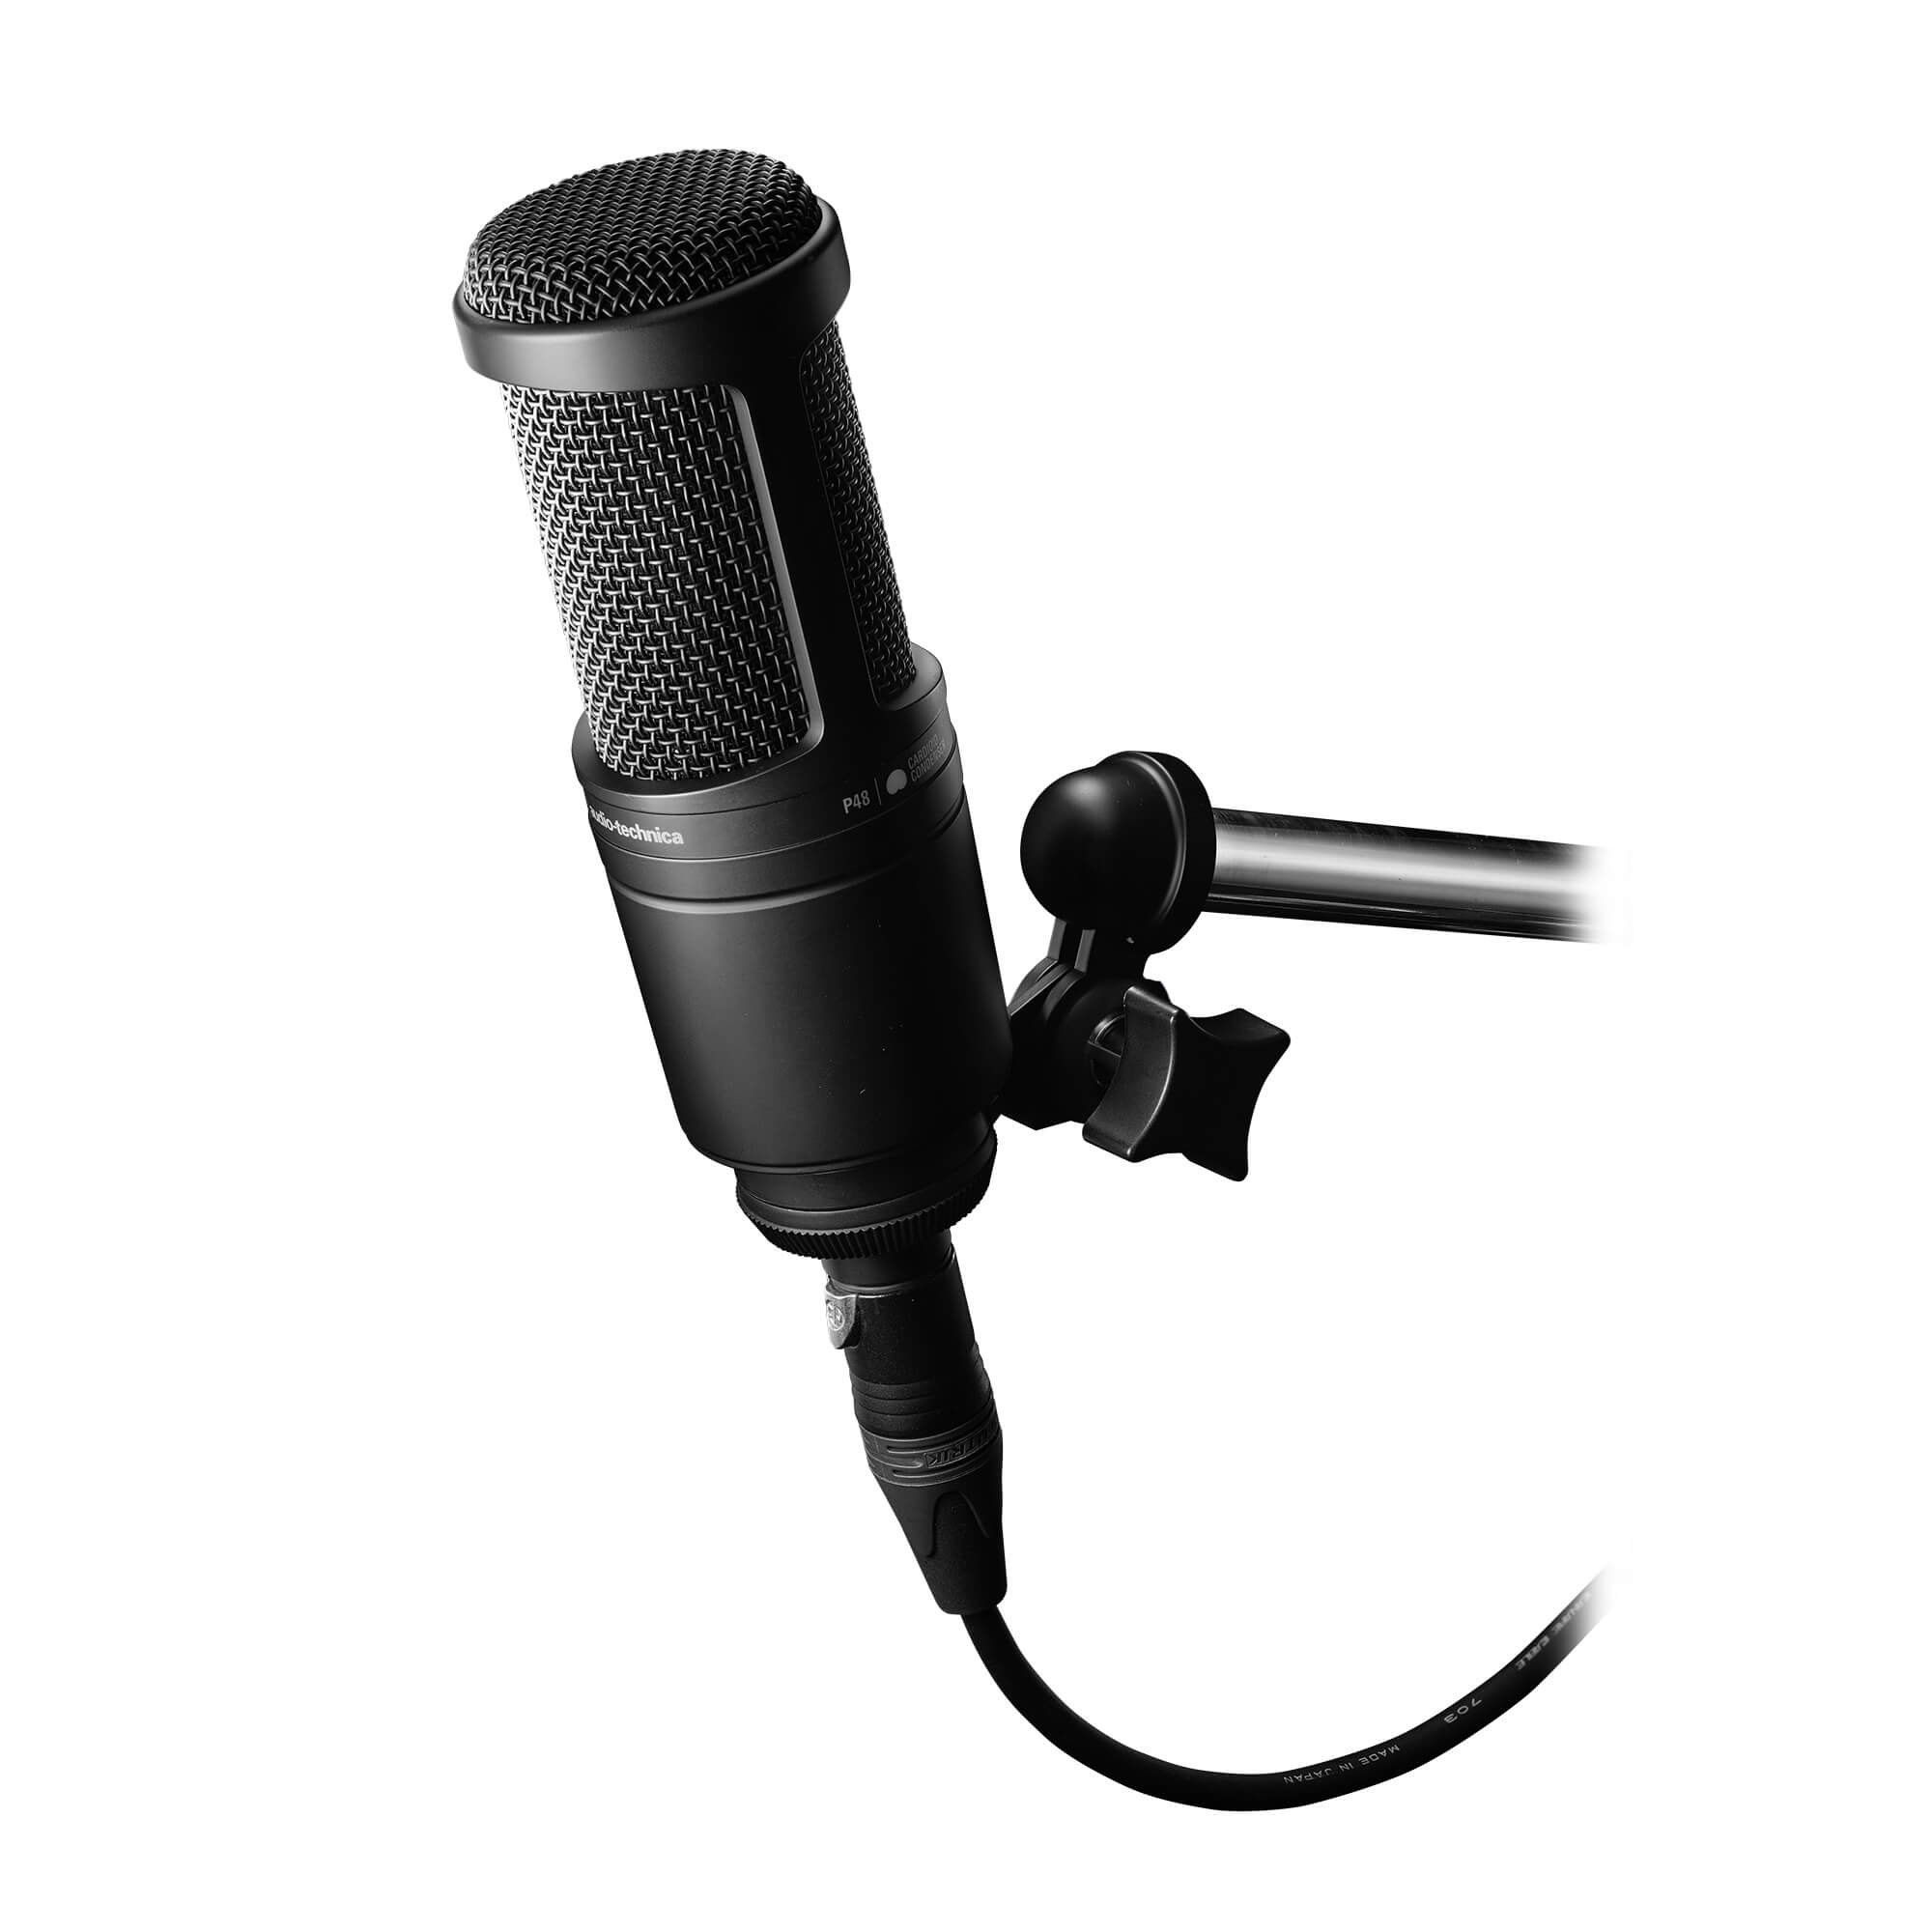 Audio-Technica AT2020 Cardioid Condenser Microphone with pivoting, threaded stand mount